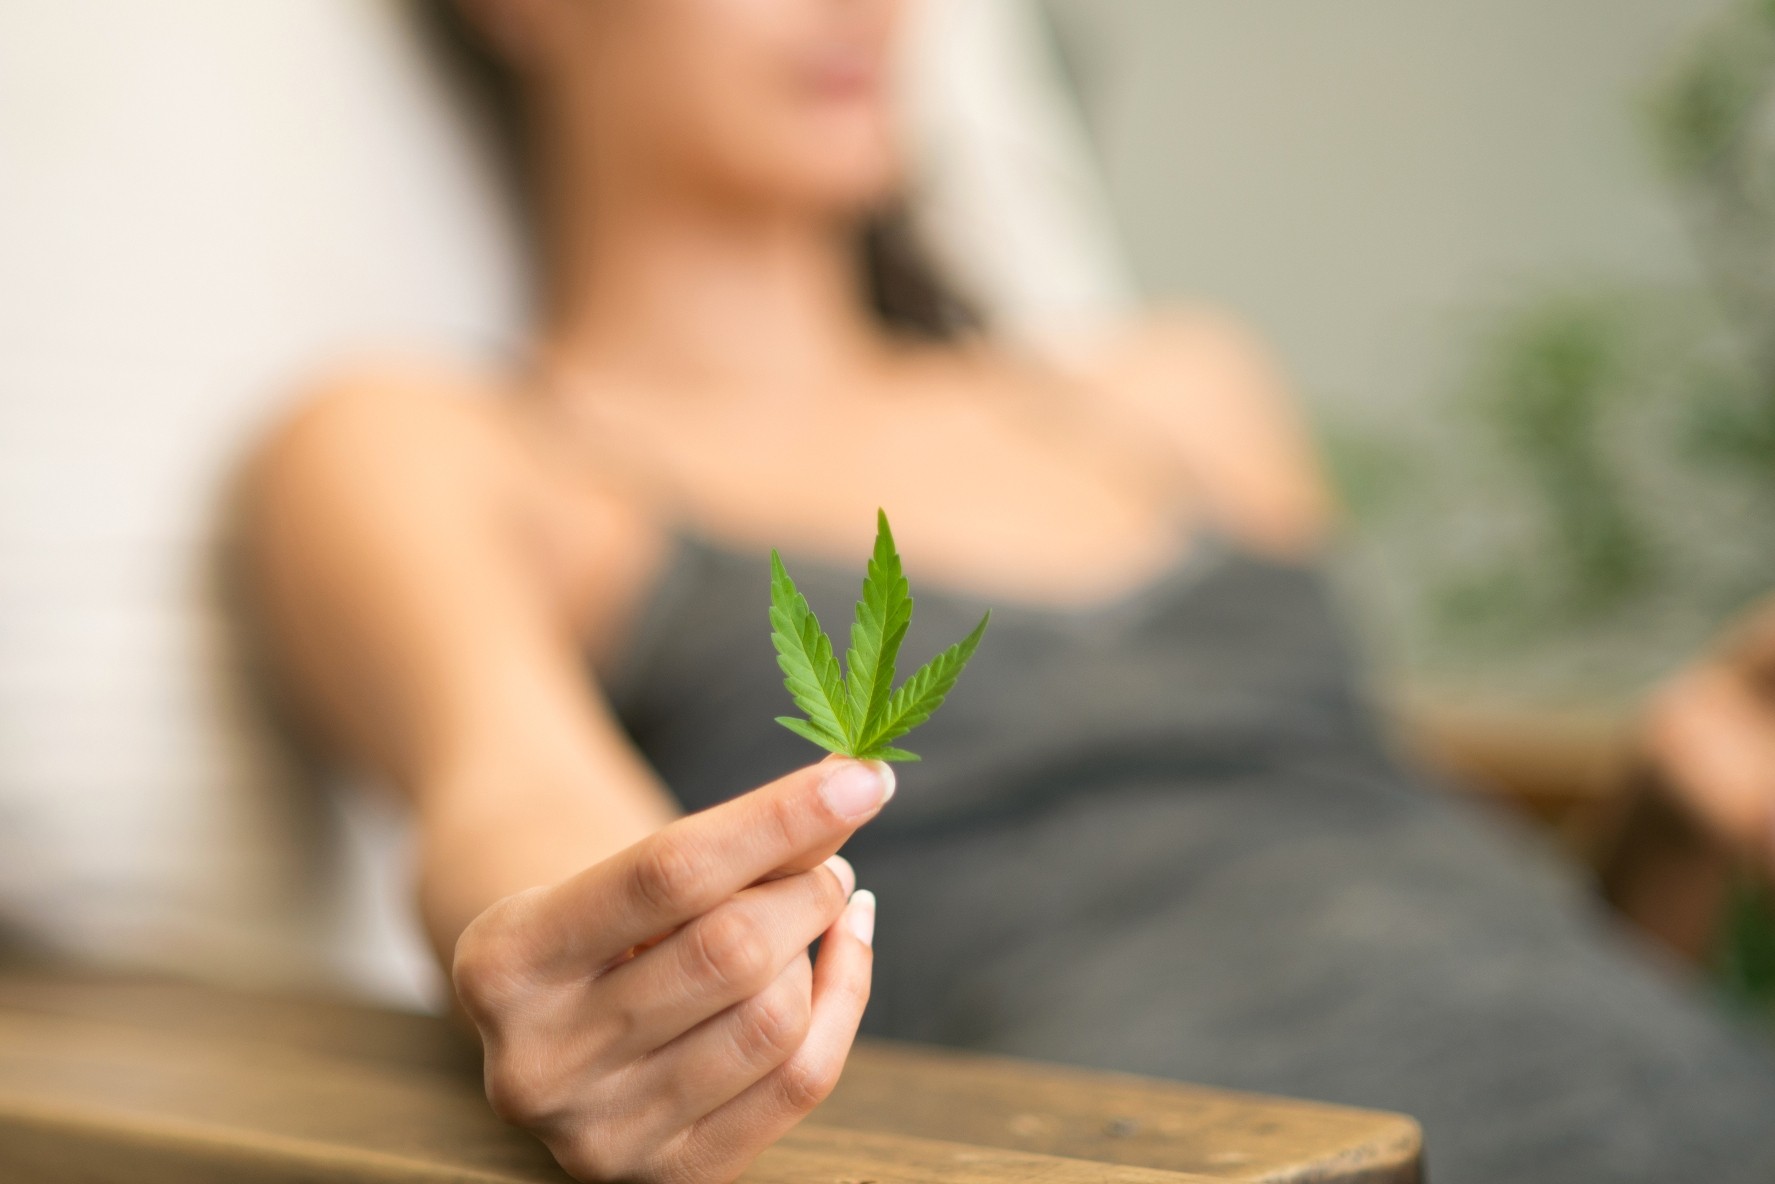 Association of Cannabis Use in Adolescence and Risk of Depression, Anxiety, and Suicidality in Young Adulthood A Systematic Review and Meta-analysis – UNIAD – Unidade de Pesquisa em Álcool e Drogas